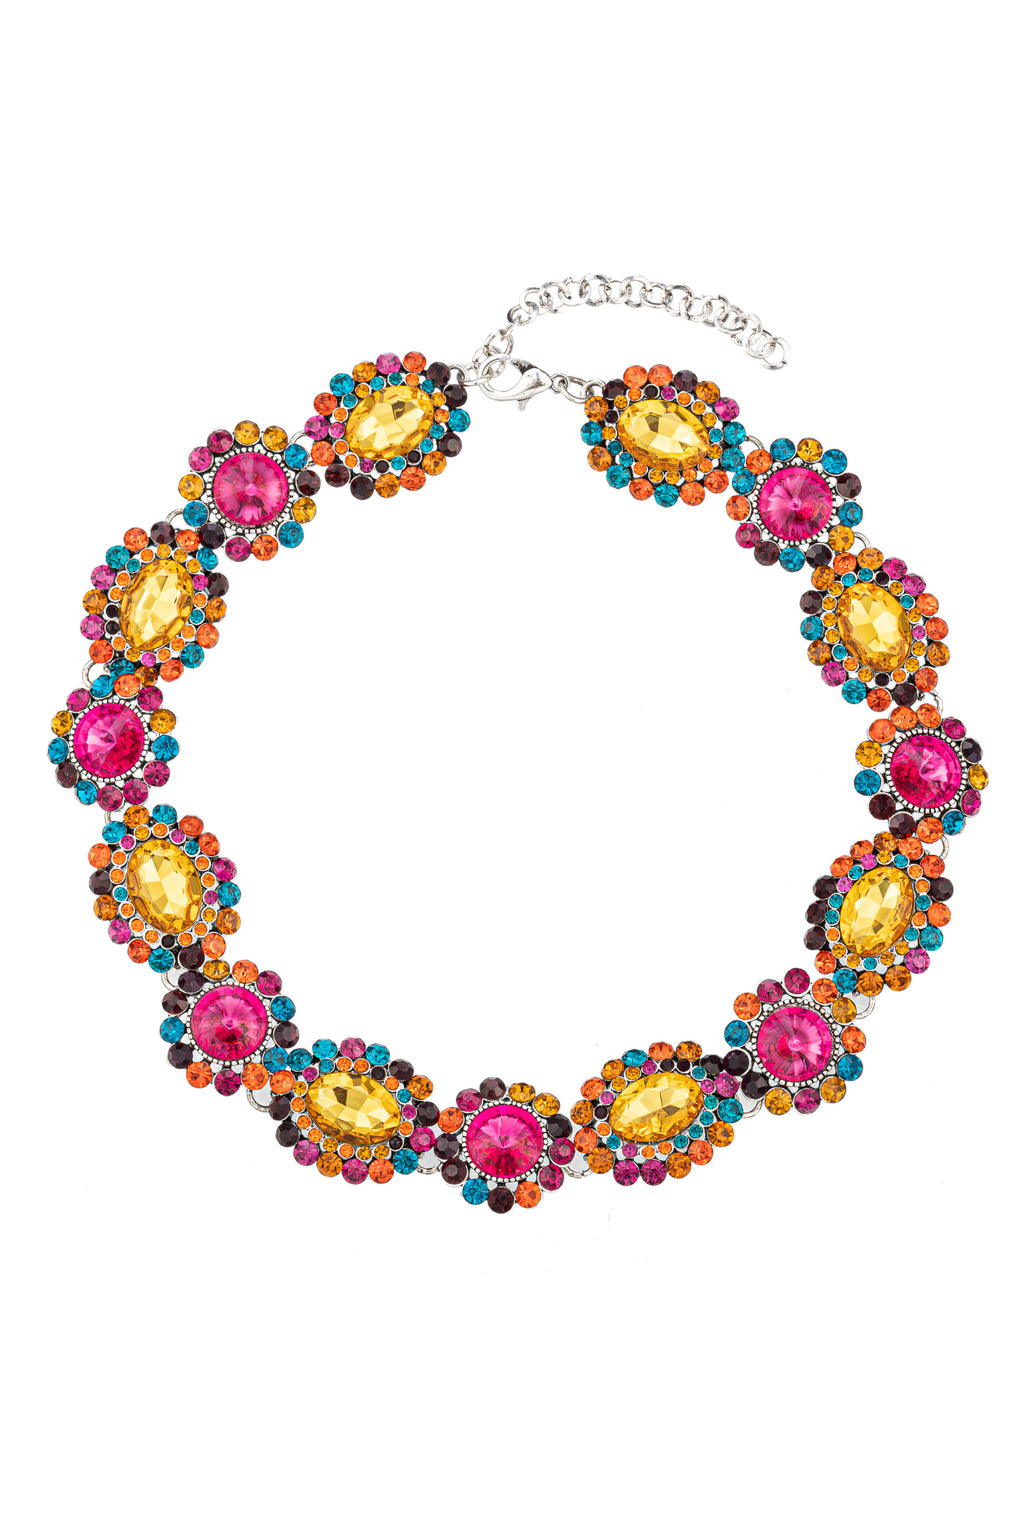 Gold tone alloy pink and yellow glass crystal collar necklace.